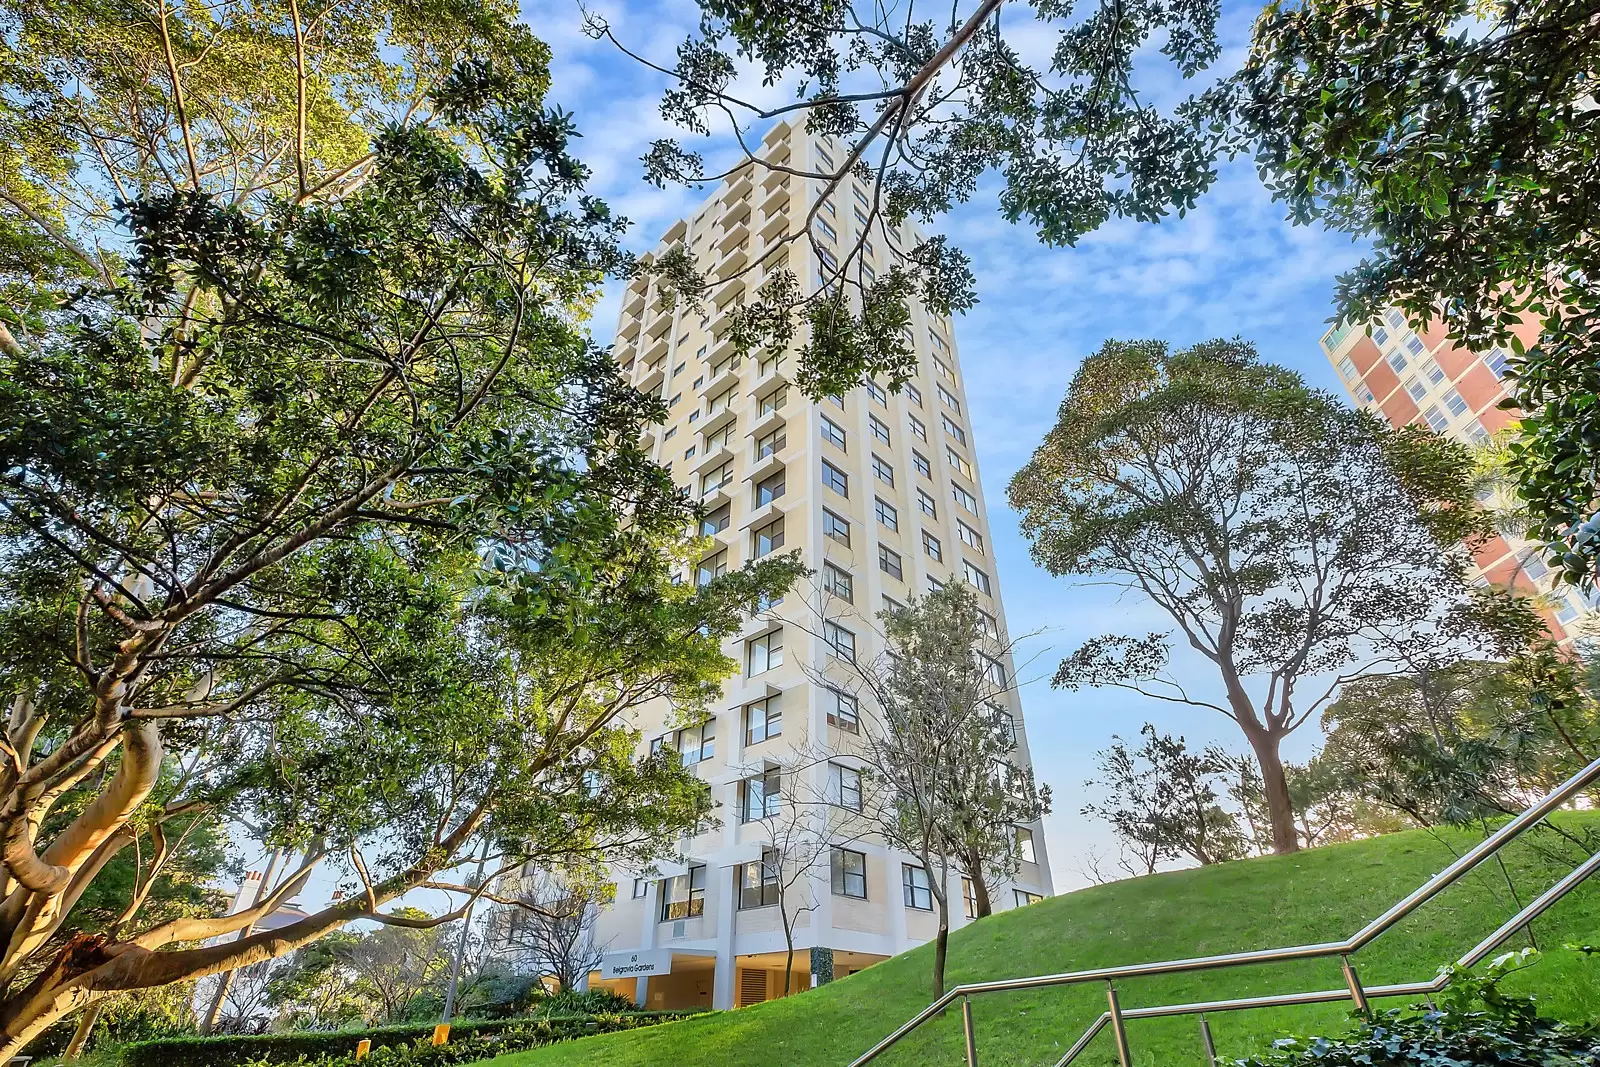 Photo #13: 32/60 Darling Point Road, Darling Point - Sold by Sydney Sotheby's International Realty